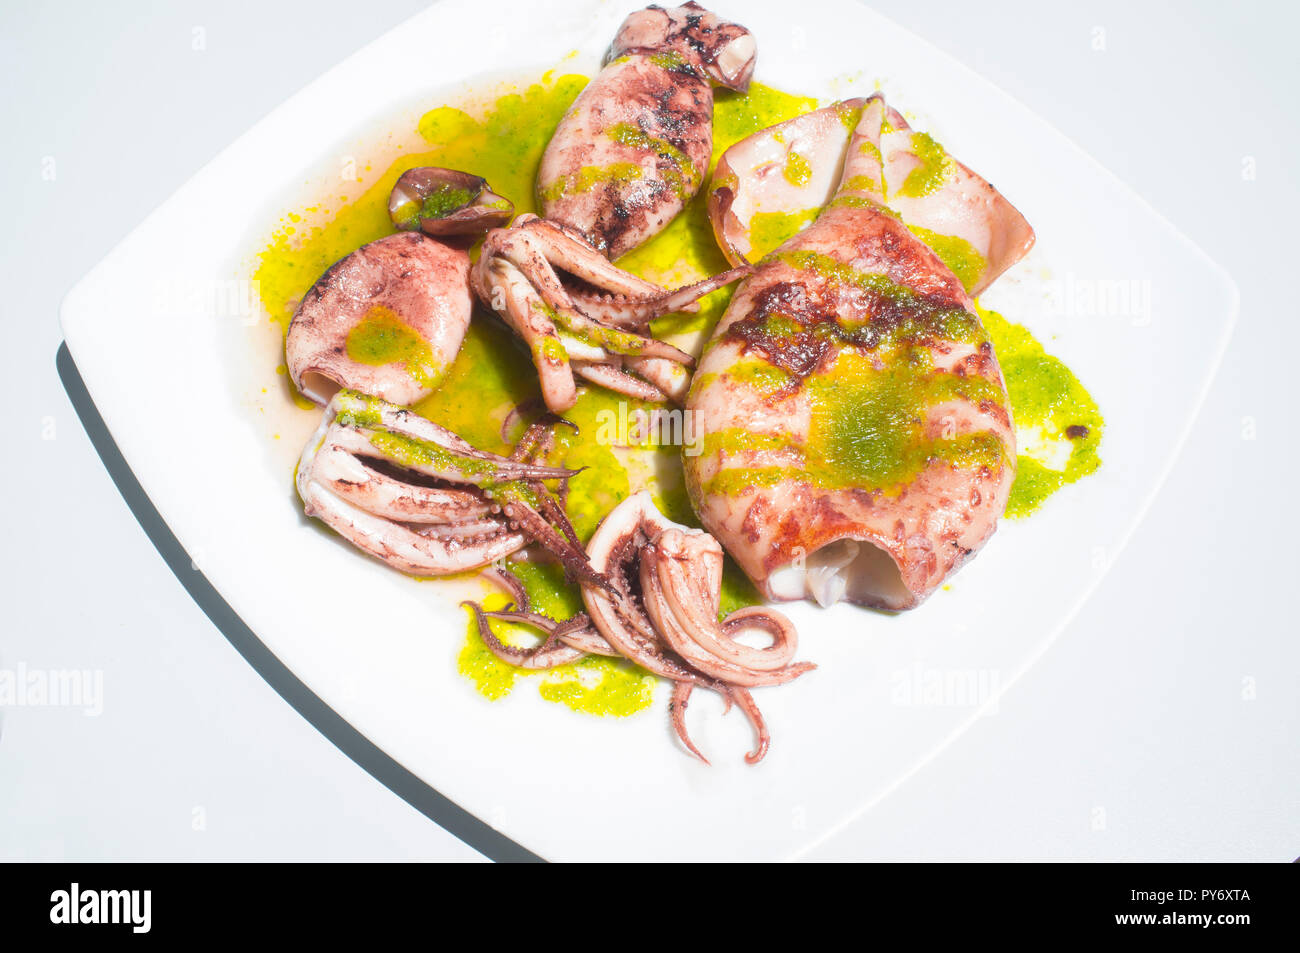 Griddle cuttlefish seasoned with green parsley sauce. Overhead shot Stock Photo